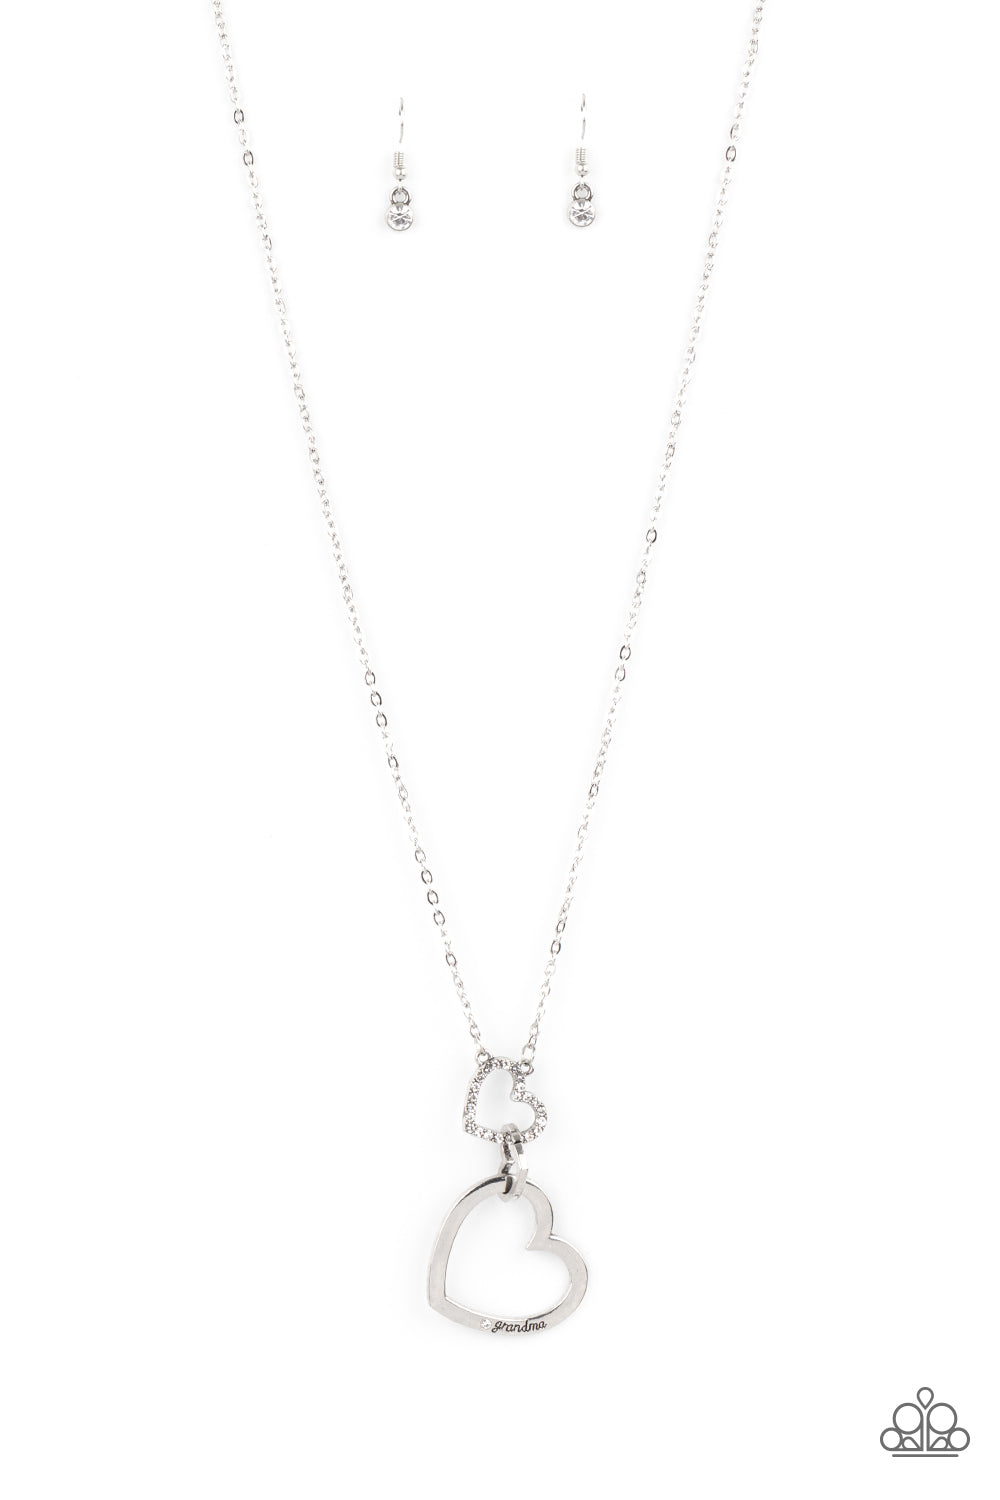 Grandma Glow - White and Silver Necklace - Paparazzi Accessories - A silver heart engraved with the word "Grandma," dangles from two smaller hearts at the bottom of a lengthened silver chain. The first heart is accented with sparkly white rhinestones creating an affectionately sentimental pendant.